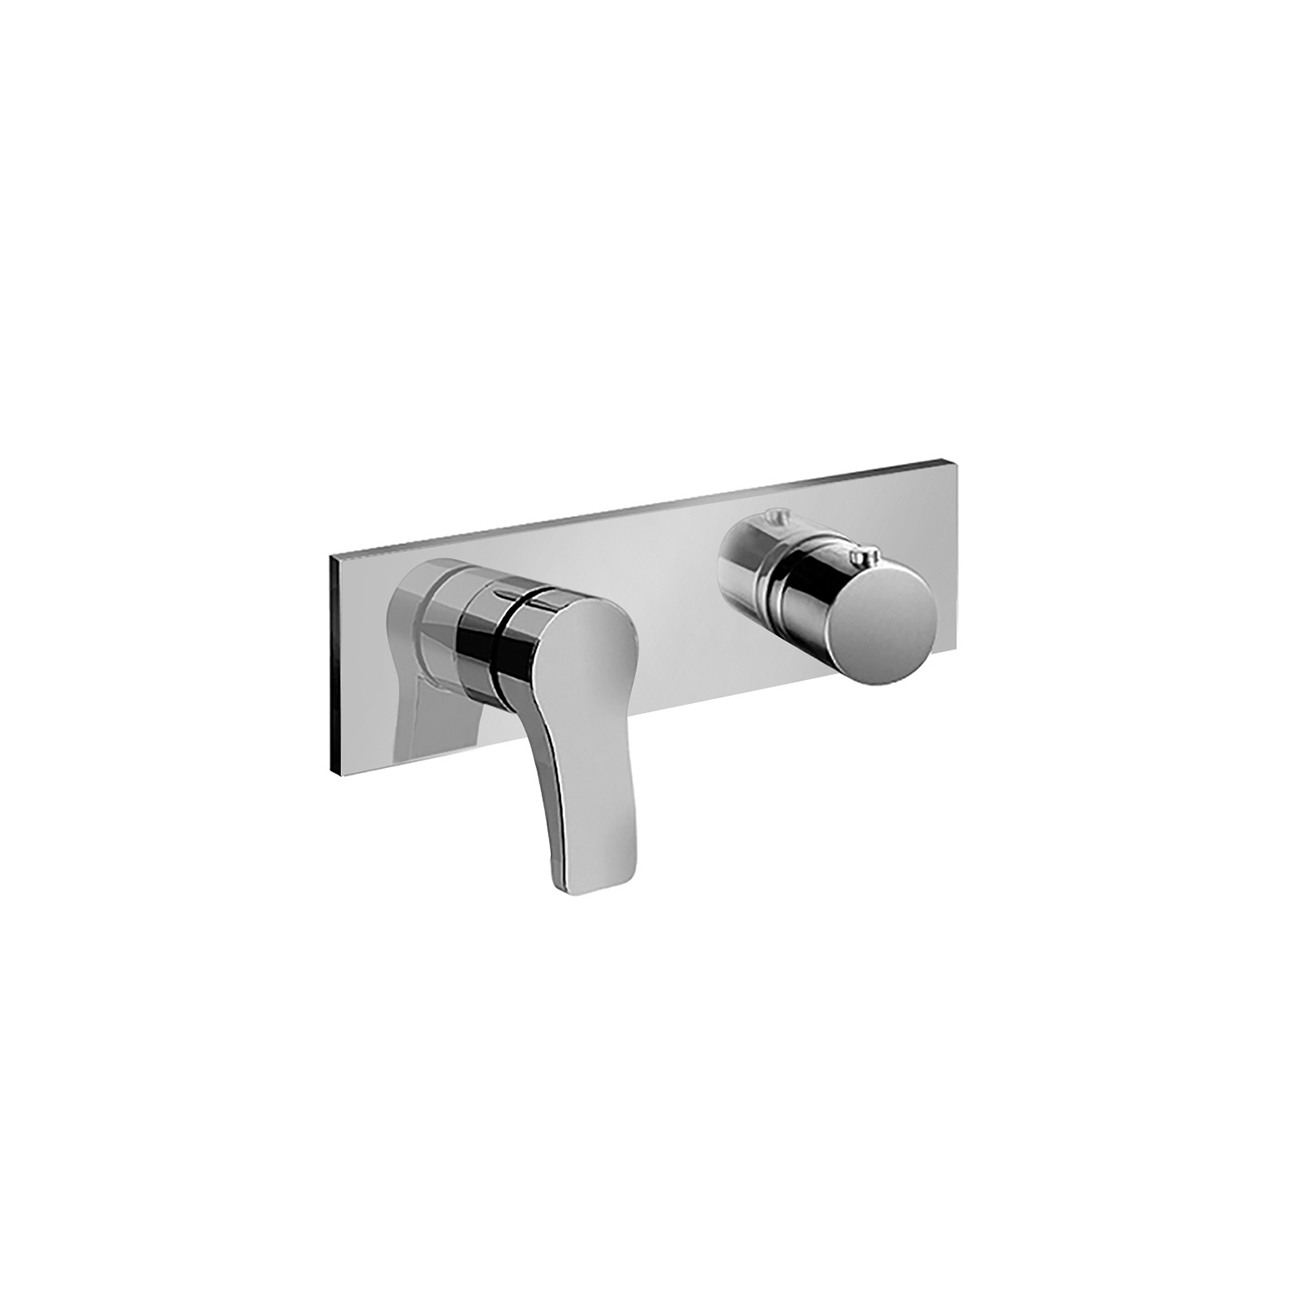 FANTINI ABOUTWATER AL/23 THERMOSTATIC SHOWER MIXER